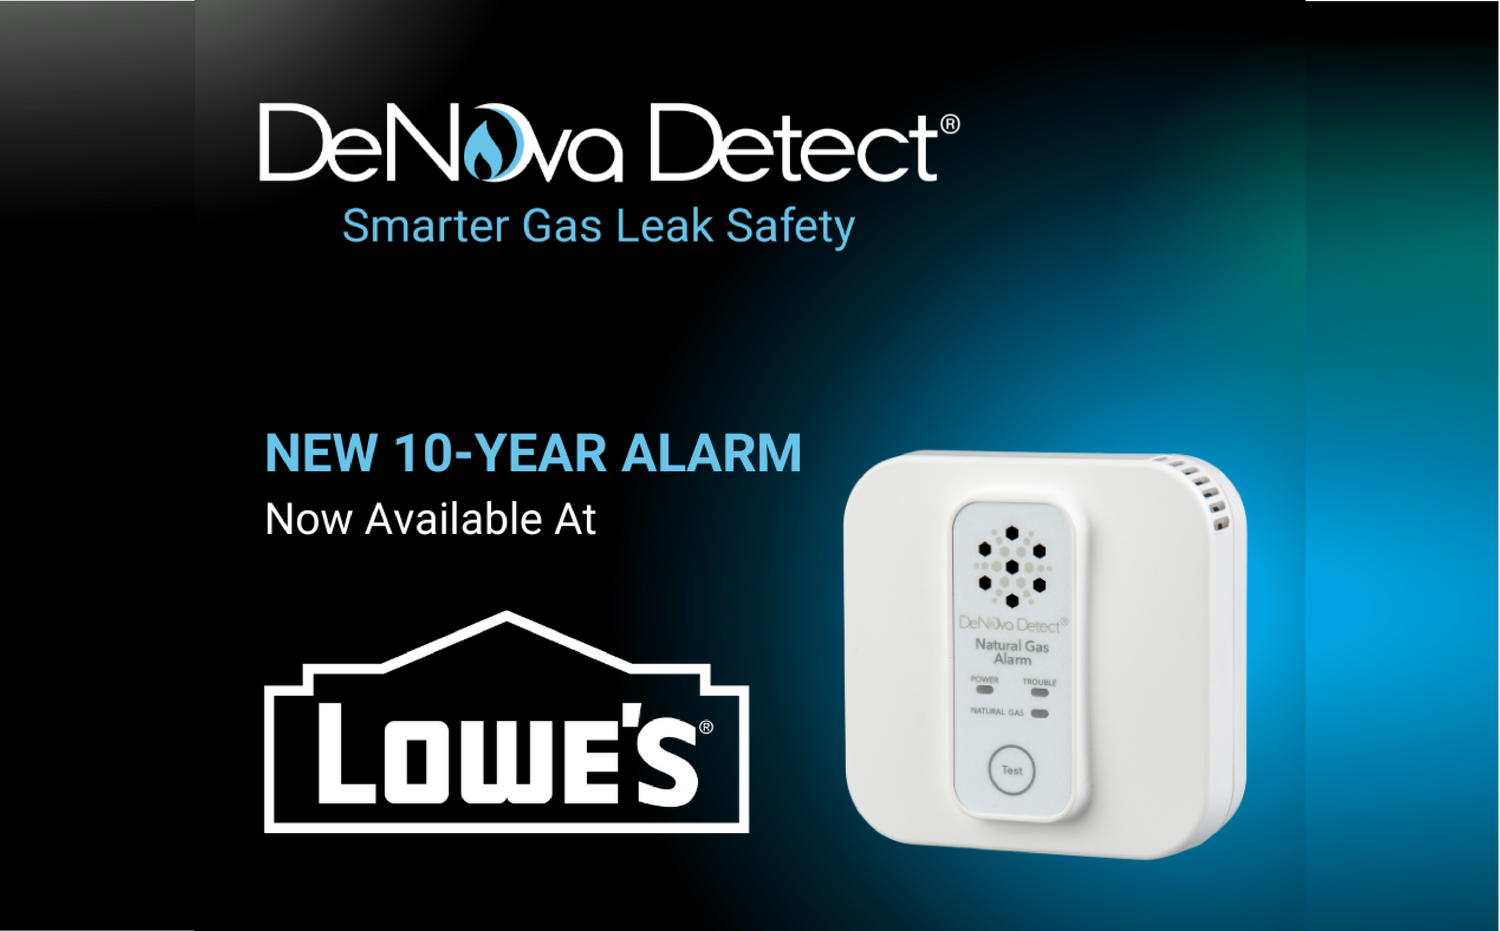 New DeNova Detect 10-Year Battery Powered Natural Gas Alarm Available at Lowe's